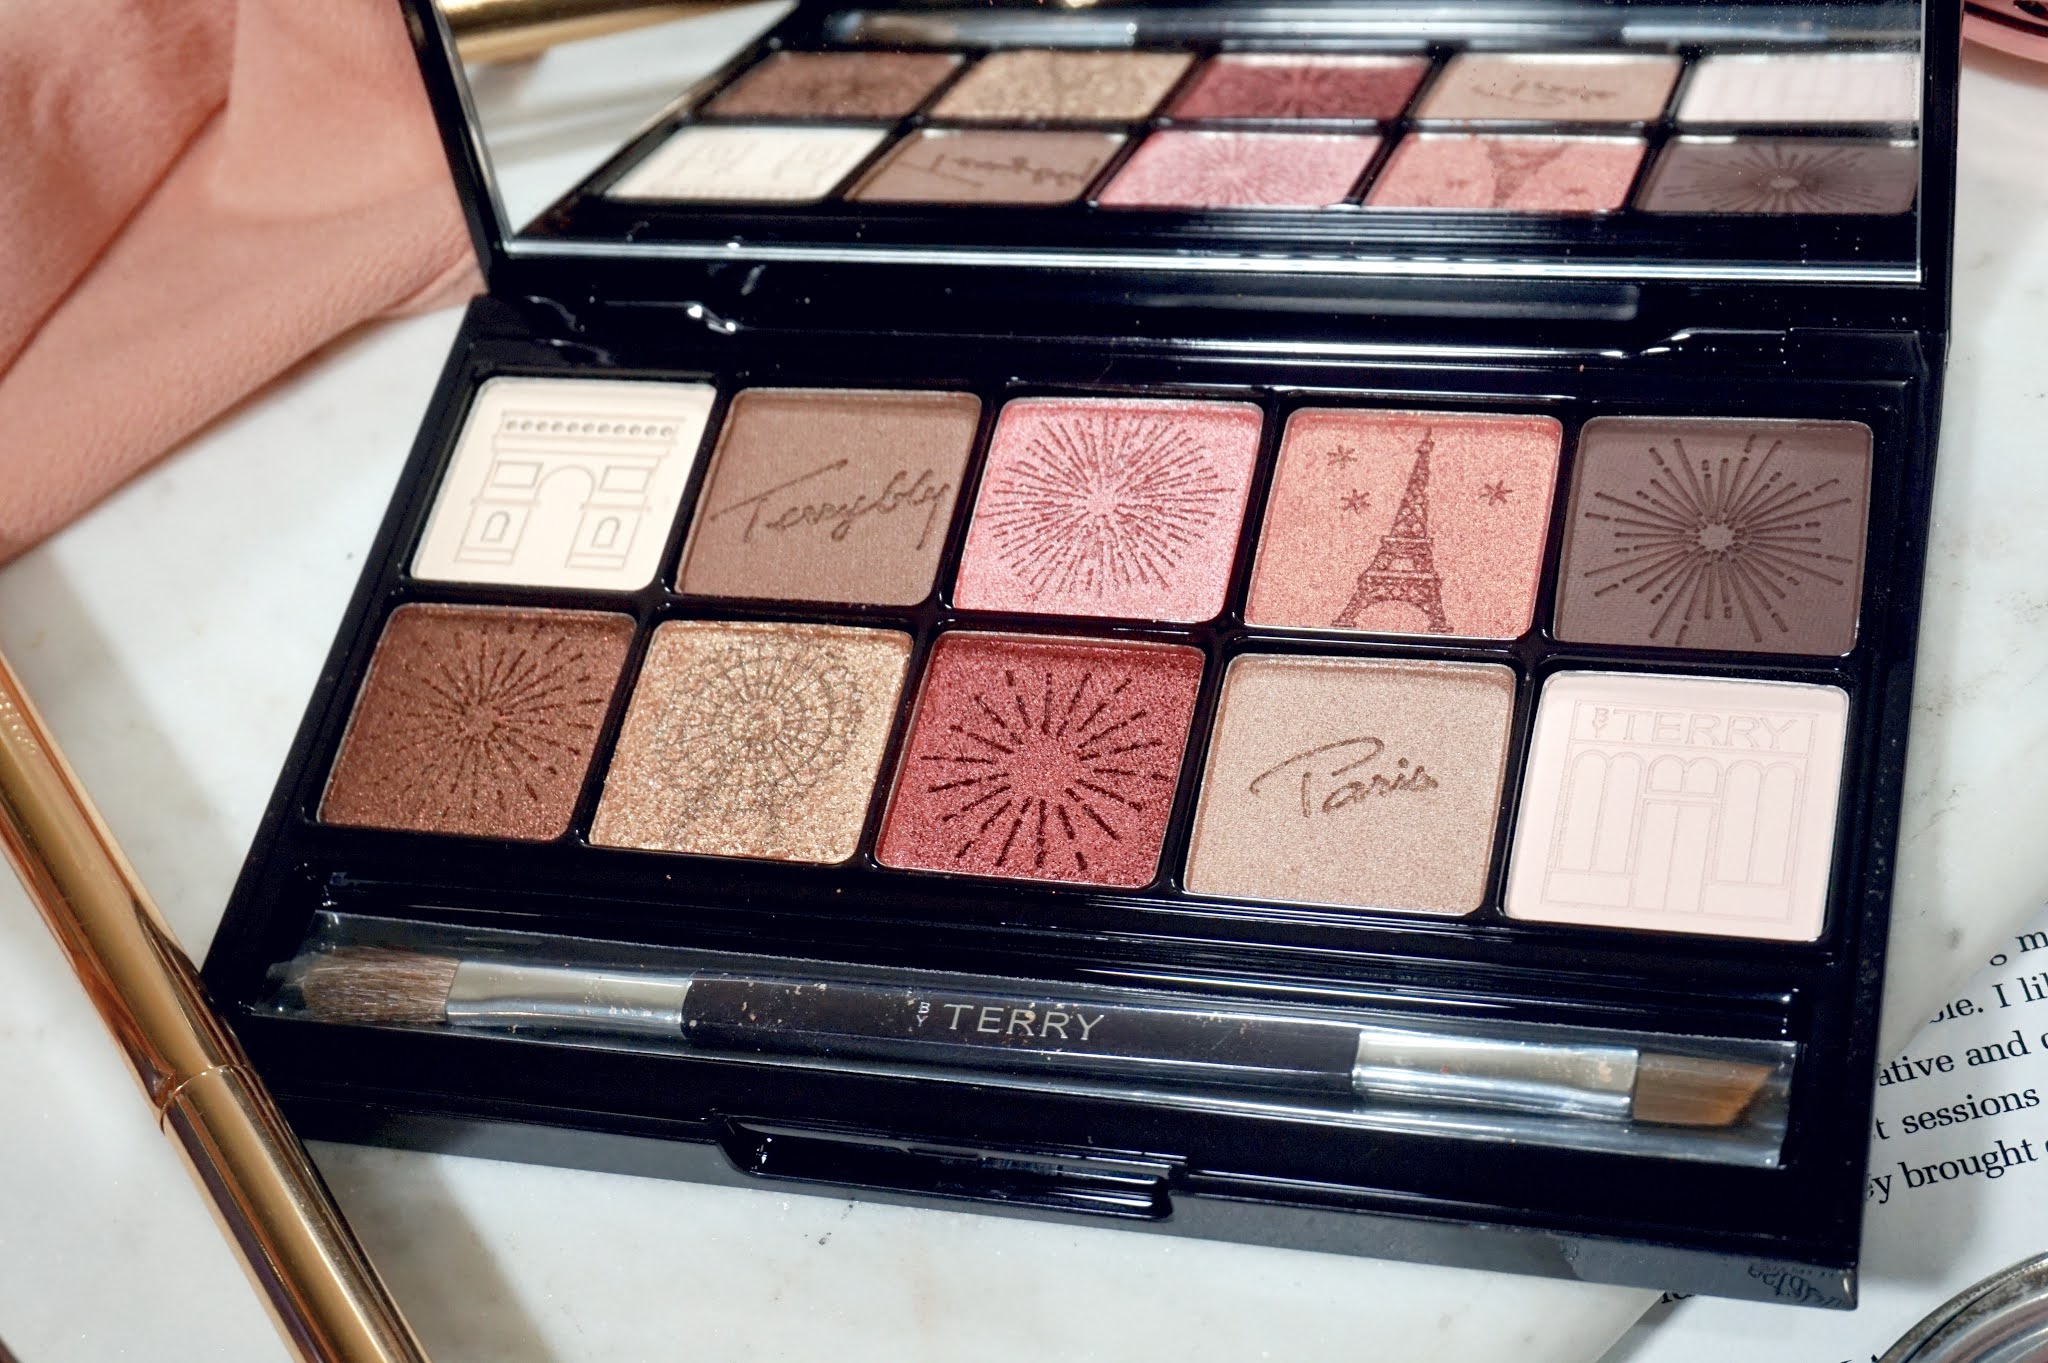 By Terry V.I.P. Expert Palette Paris Mon Amour Review and Swatches